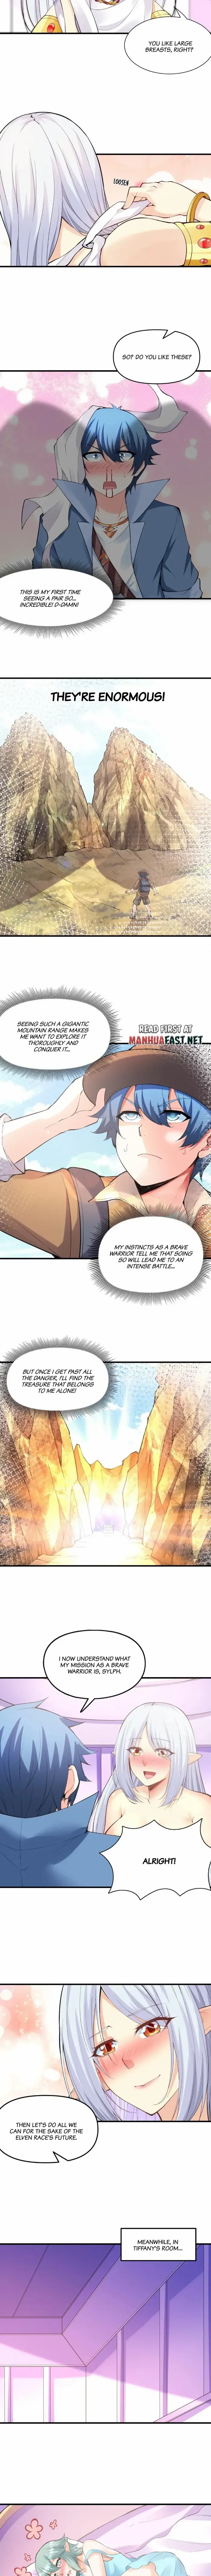 My Harem Is Entirely Female Demon Villains - Page 3